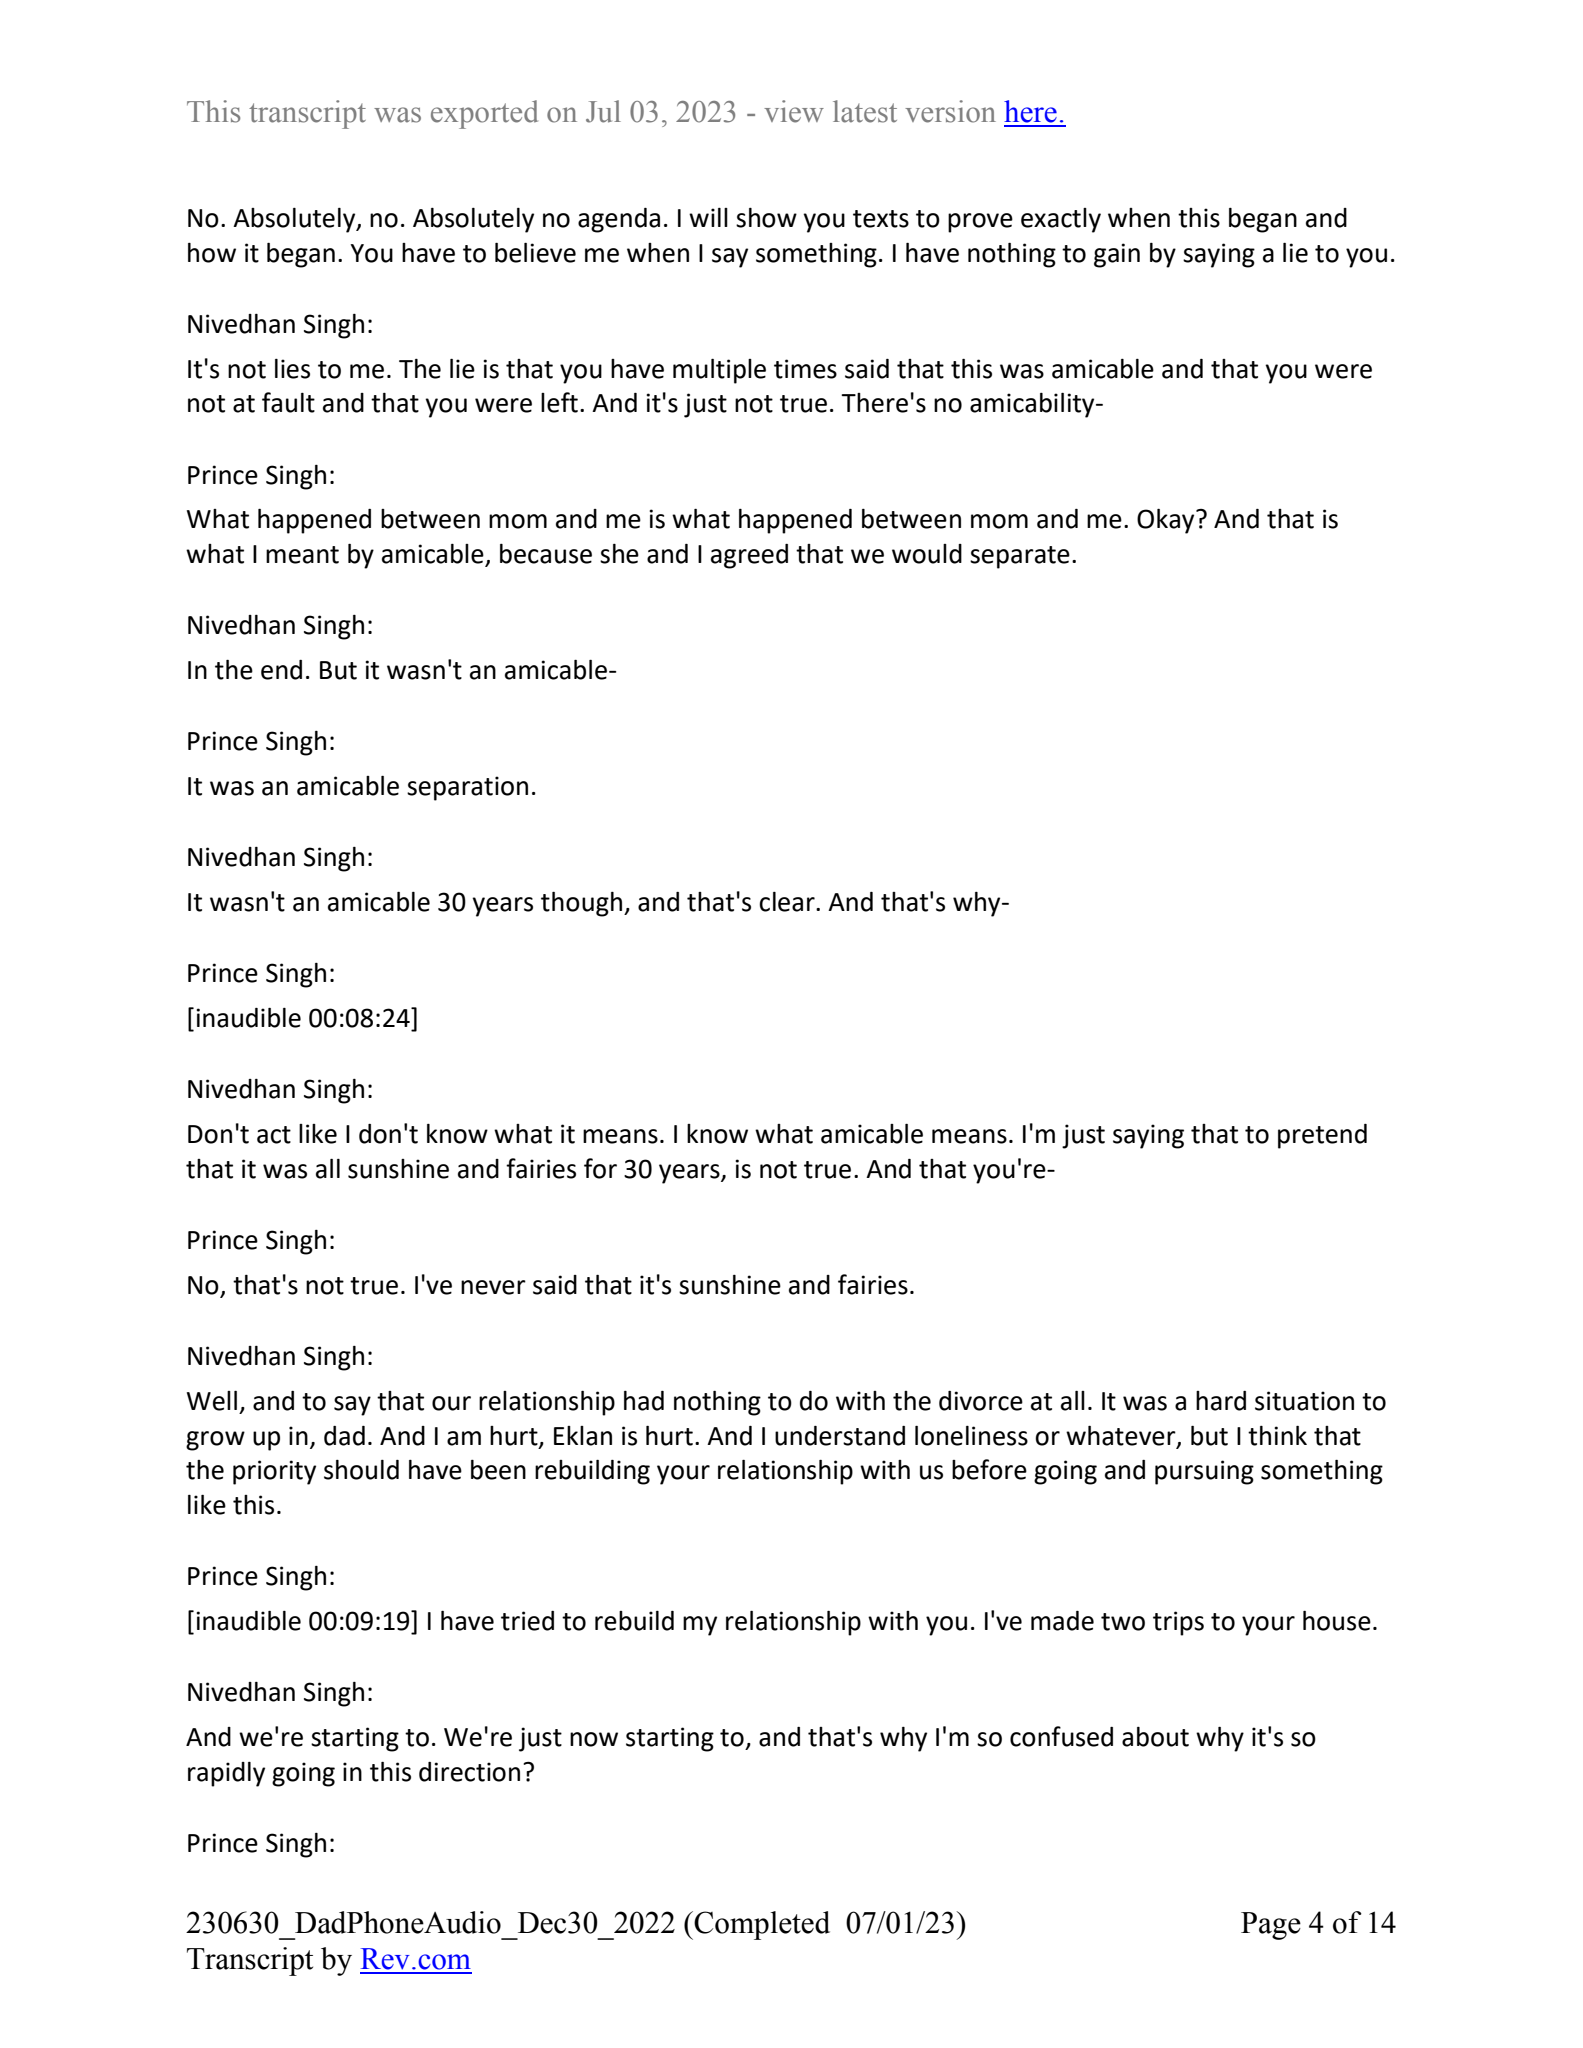 December 30th, 2022 phone call transcript - Page 4